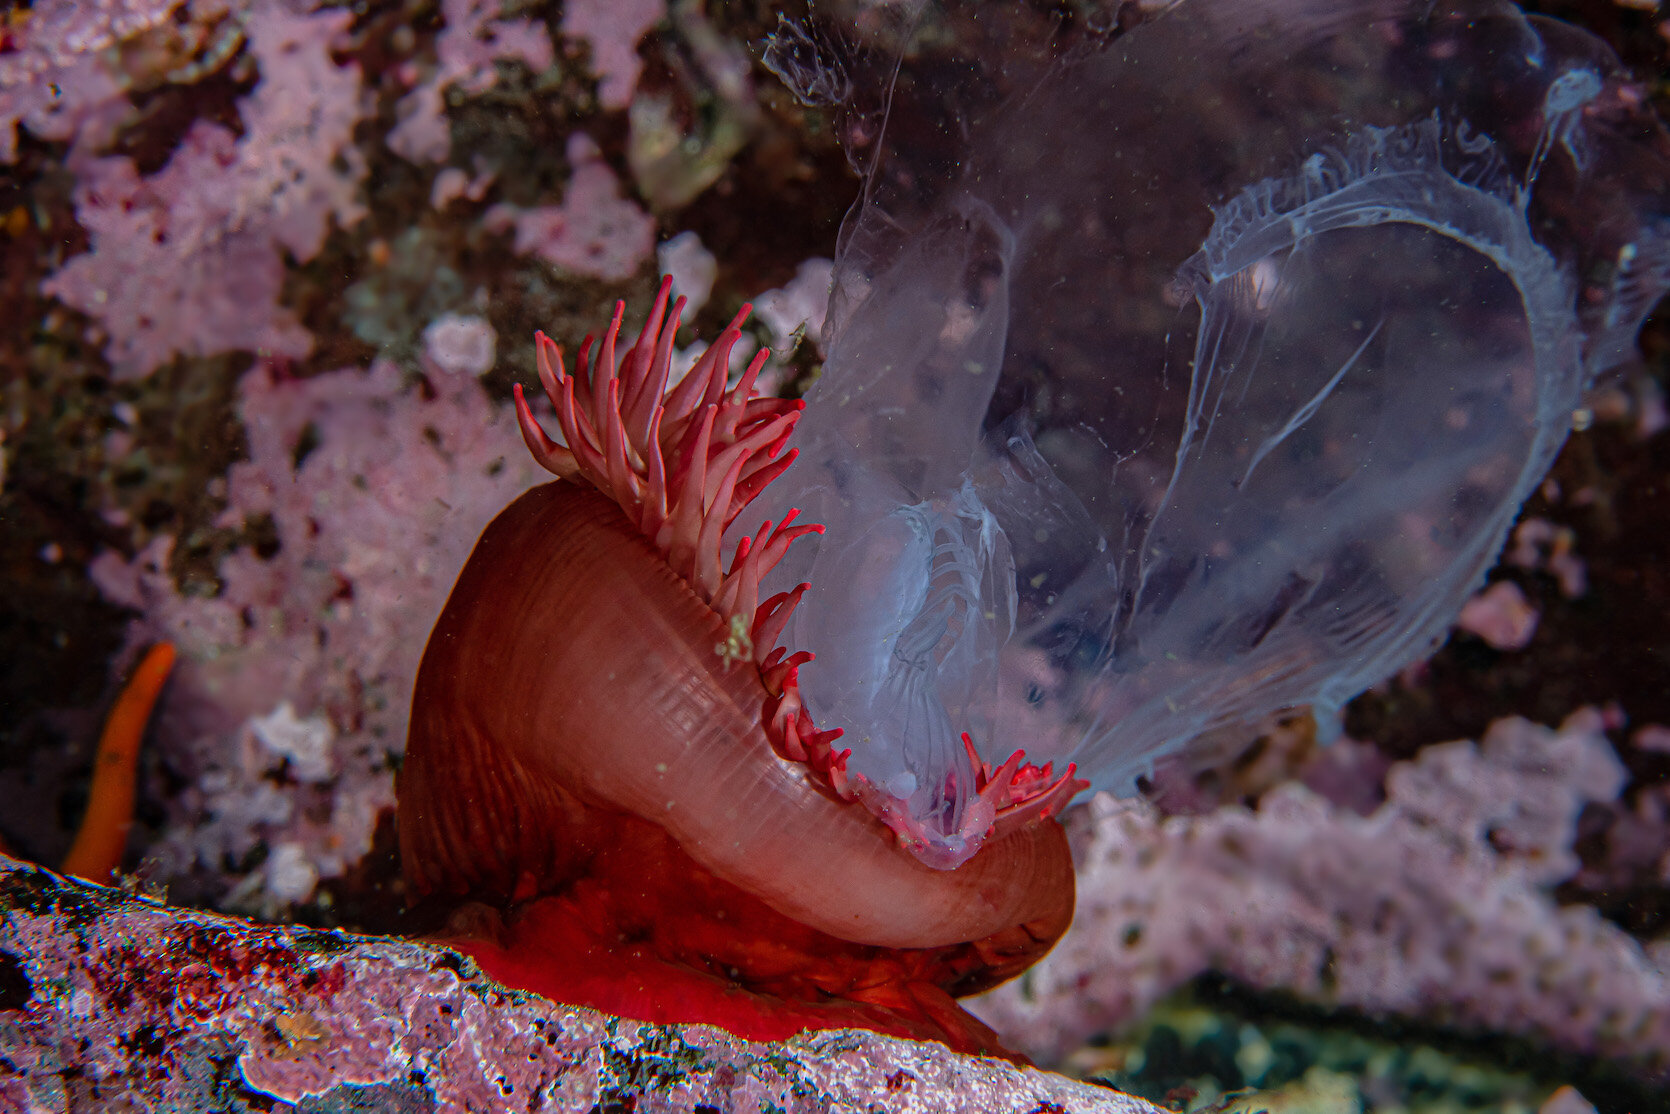 British Columbia Anemone eating a Jellyfish by Laura Tesler